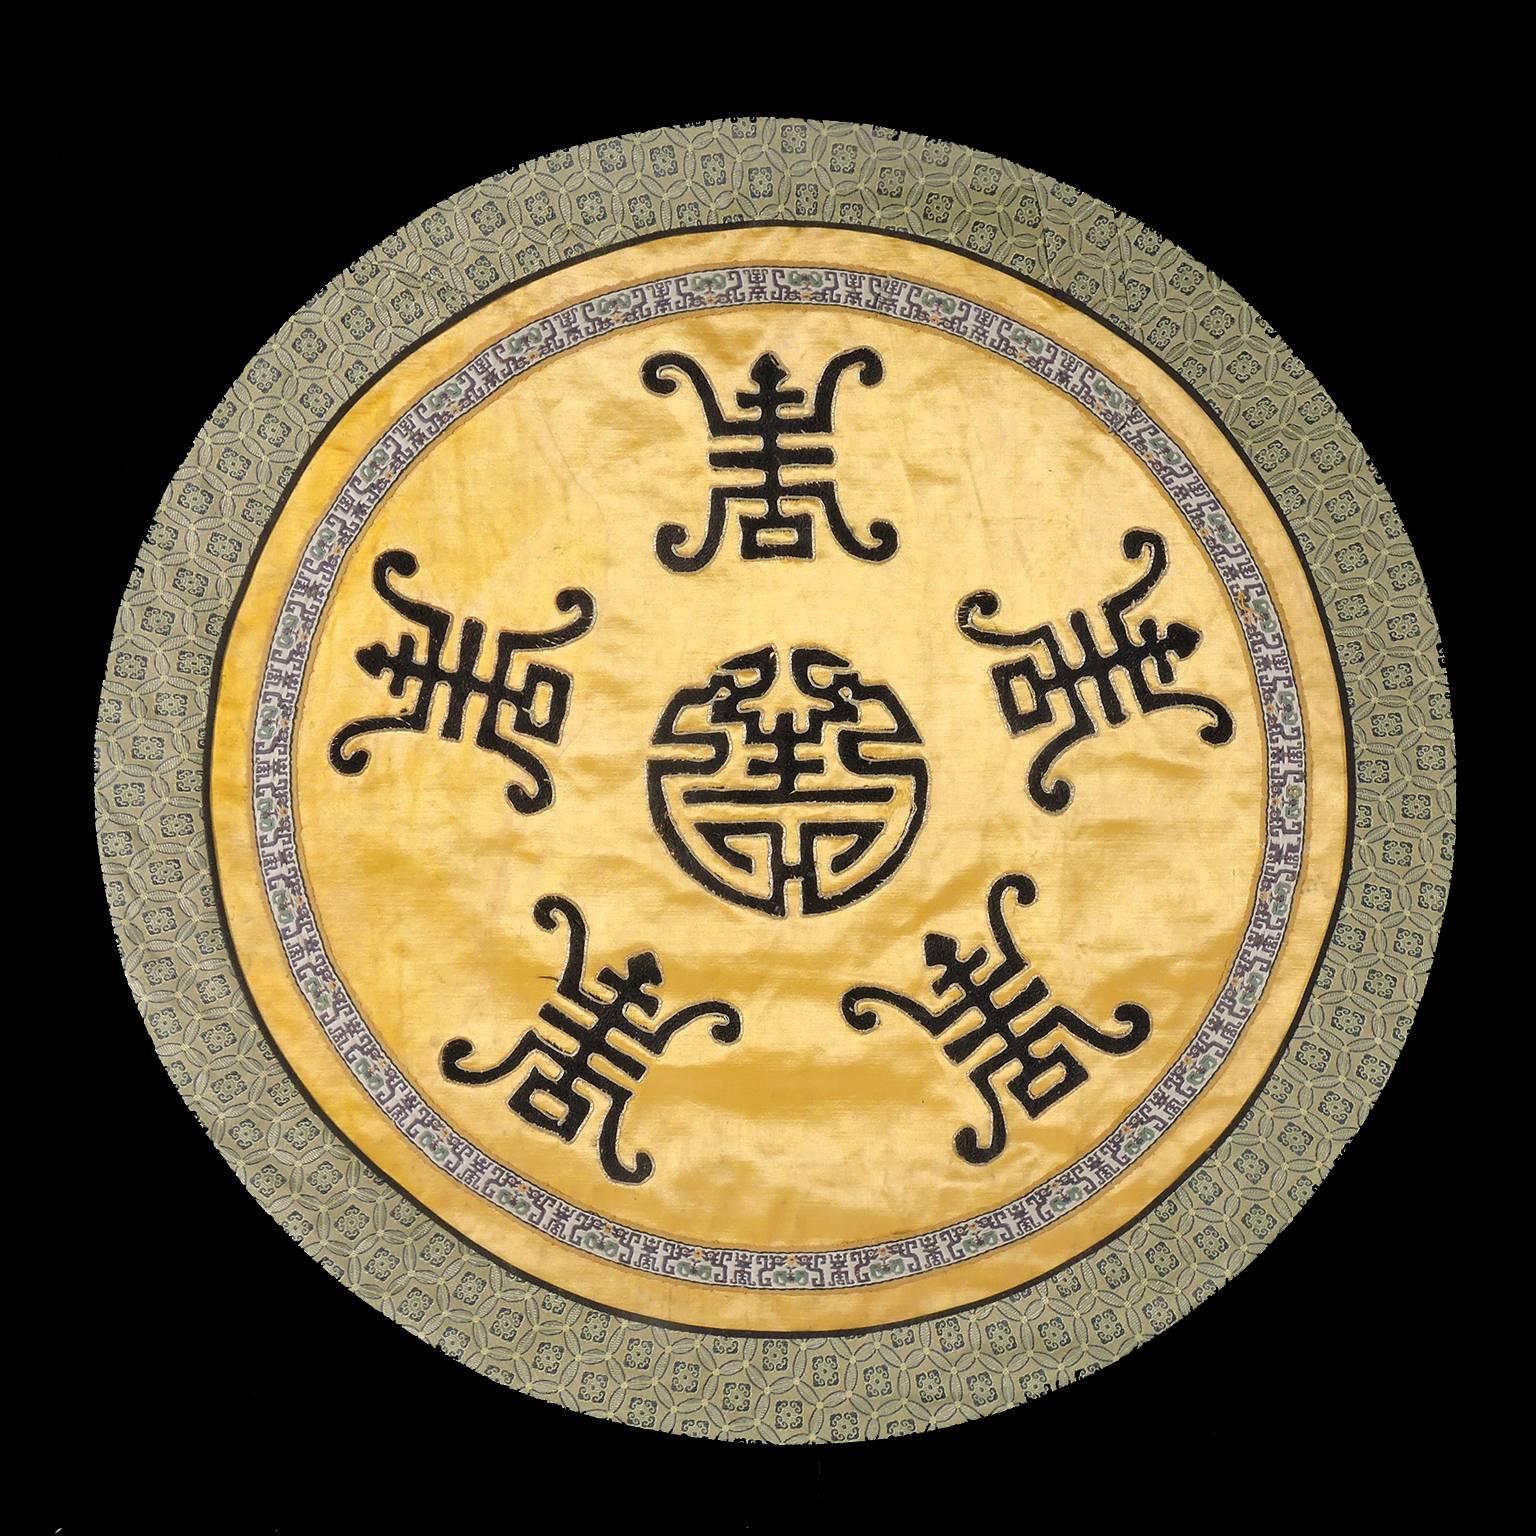 19th century Chinese embroidered silk roundel textile, of gold silk ground with dark blue embroidered central medallion Shou symbol of longevity surrounded by five calligraphic representations of the Shou symbol. Diameter of textile: 19 inches;